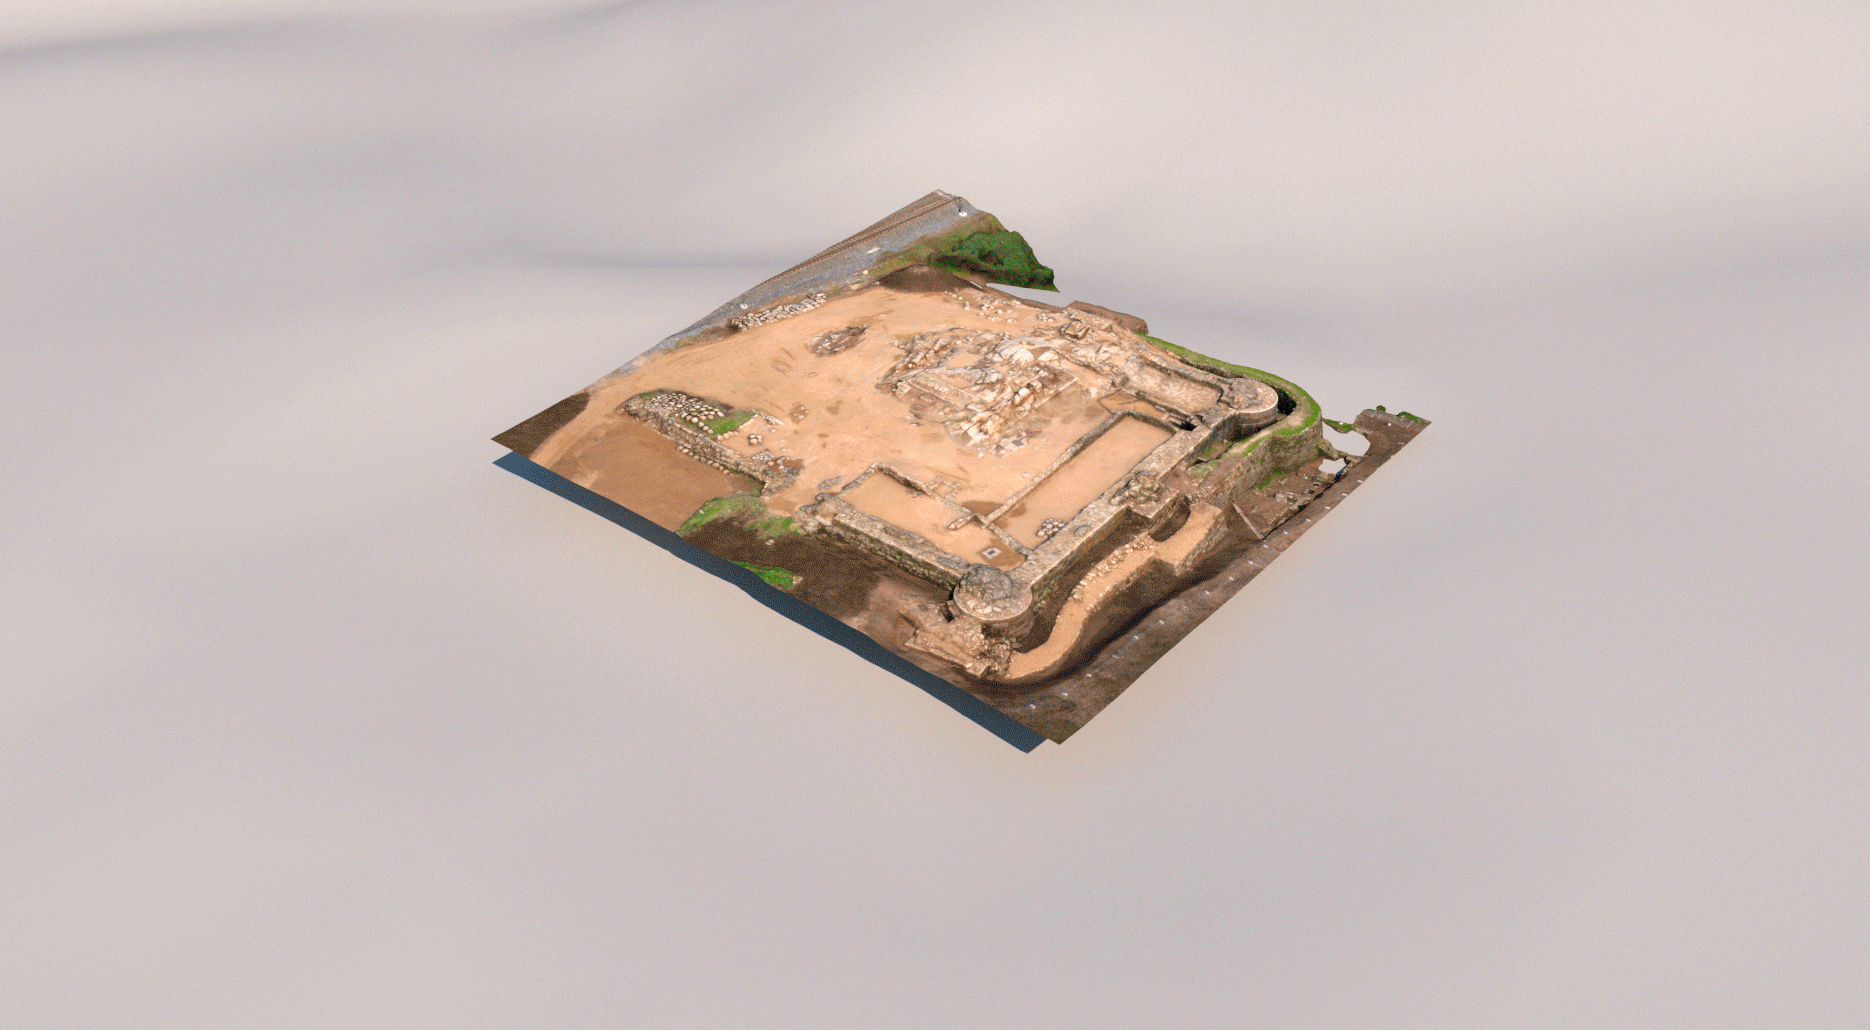 Rocha Forte castle. Reconstruction process from photogrammetry of the archaeological site.